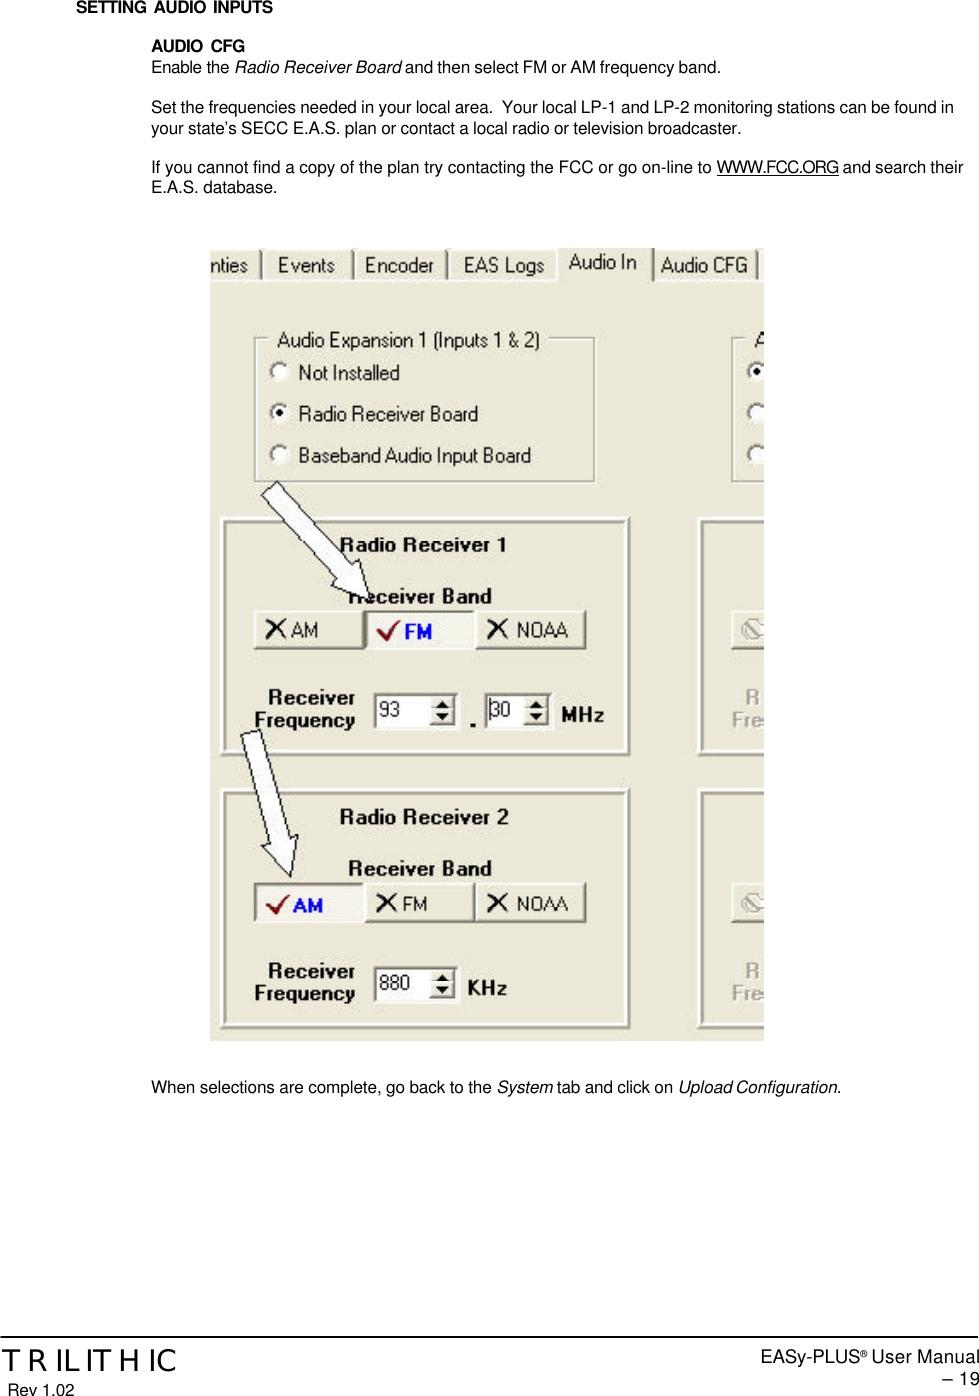 EASy-PLUS® User Manual – 19TRILITHIC Rev 1.02SETTING AUDIO INPUTSAUDIO CFGEnable the Radio Receiver Board and then select FM or AM frequency band.Set the frequencies needed in your local area.  Your local LP-1 and LP-2 monitoring stations can be found inyour state’s SECC E.A.S. plan or contact a local radio or television broadcaster.If you cannot find a copy of the plan try contacting the FCC or go on-line to WWW.FCC.ORG and search theirE.A.S. database.When selections are complete, go back to the System tab and click on Upload Configuration.